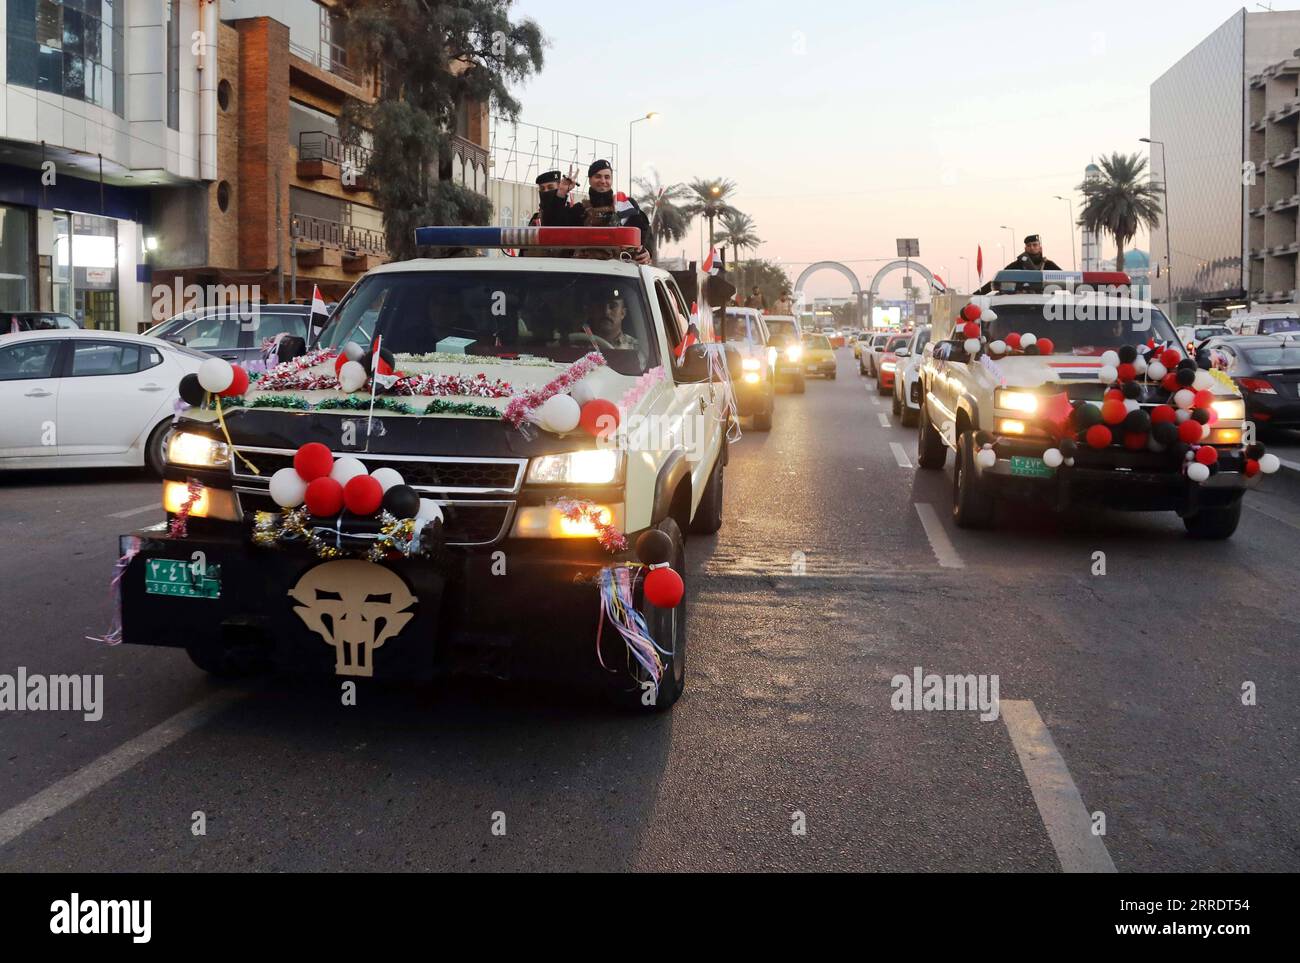 220106 -- BAGHDAD, Jan. 6, 2022 -- Military vehicles are seen on a street during a celebration of the Iraqi Army Day in Baghdad, Iraq, on Jan. 6. 2022.  IRAQ-BAGHDAD-ARMY DAY KhalilxDawood PUBLICATIONxNOTxINxCHN Stock Photo